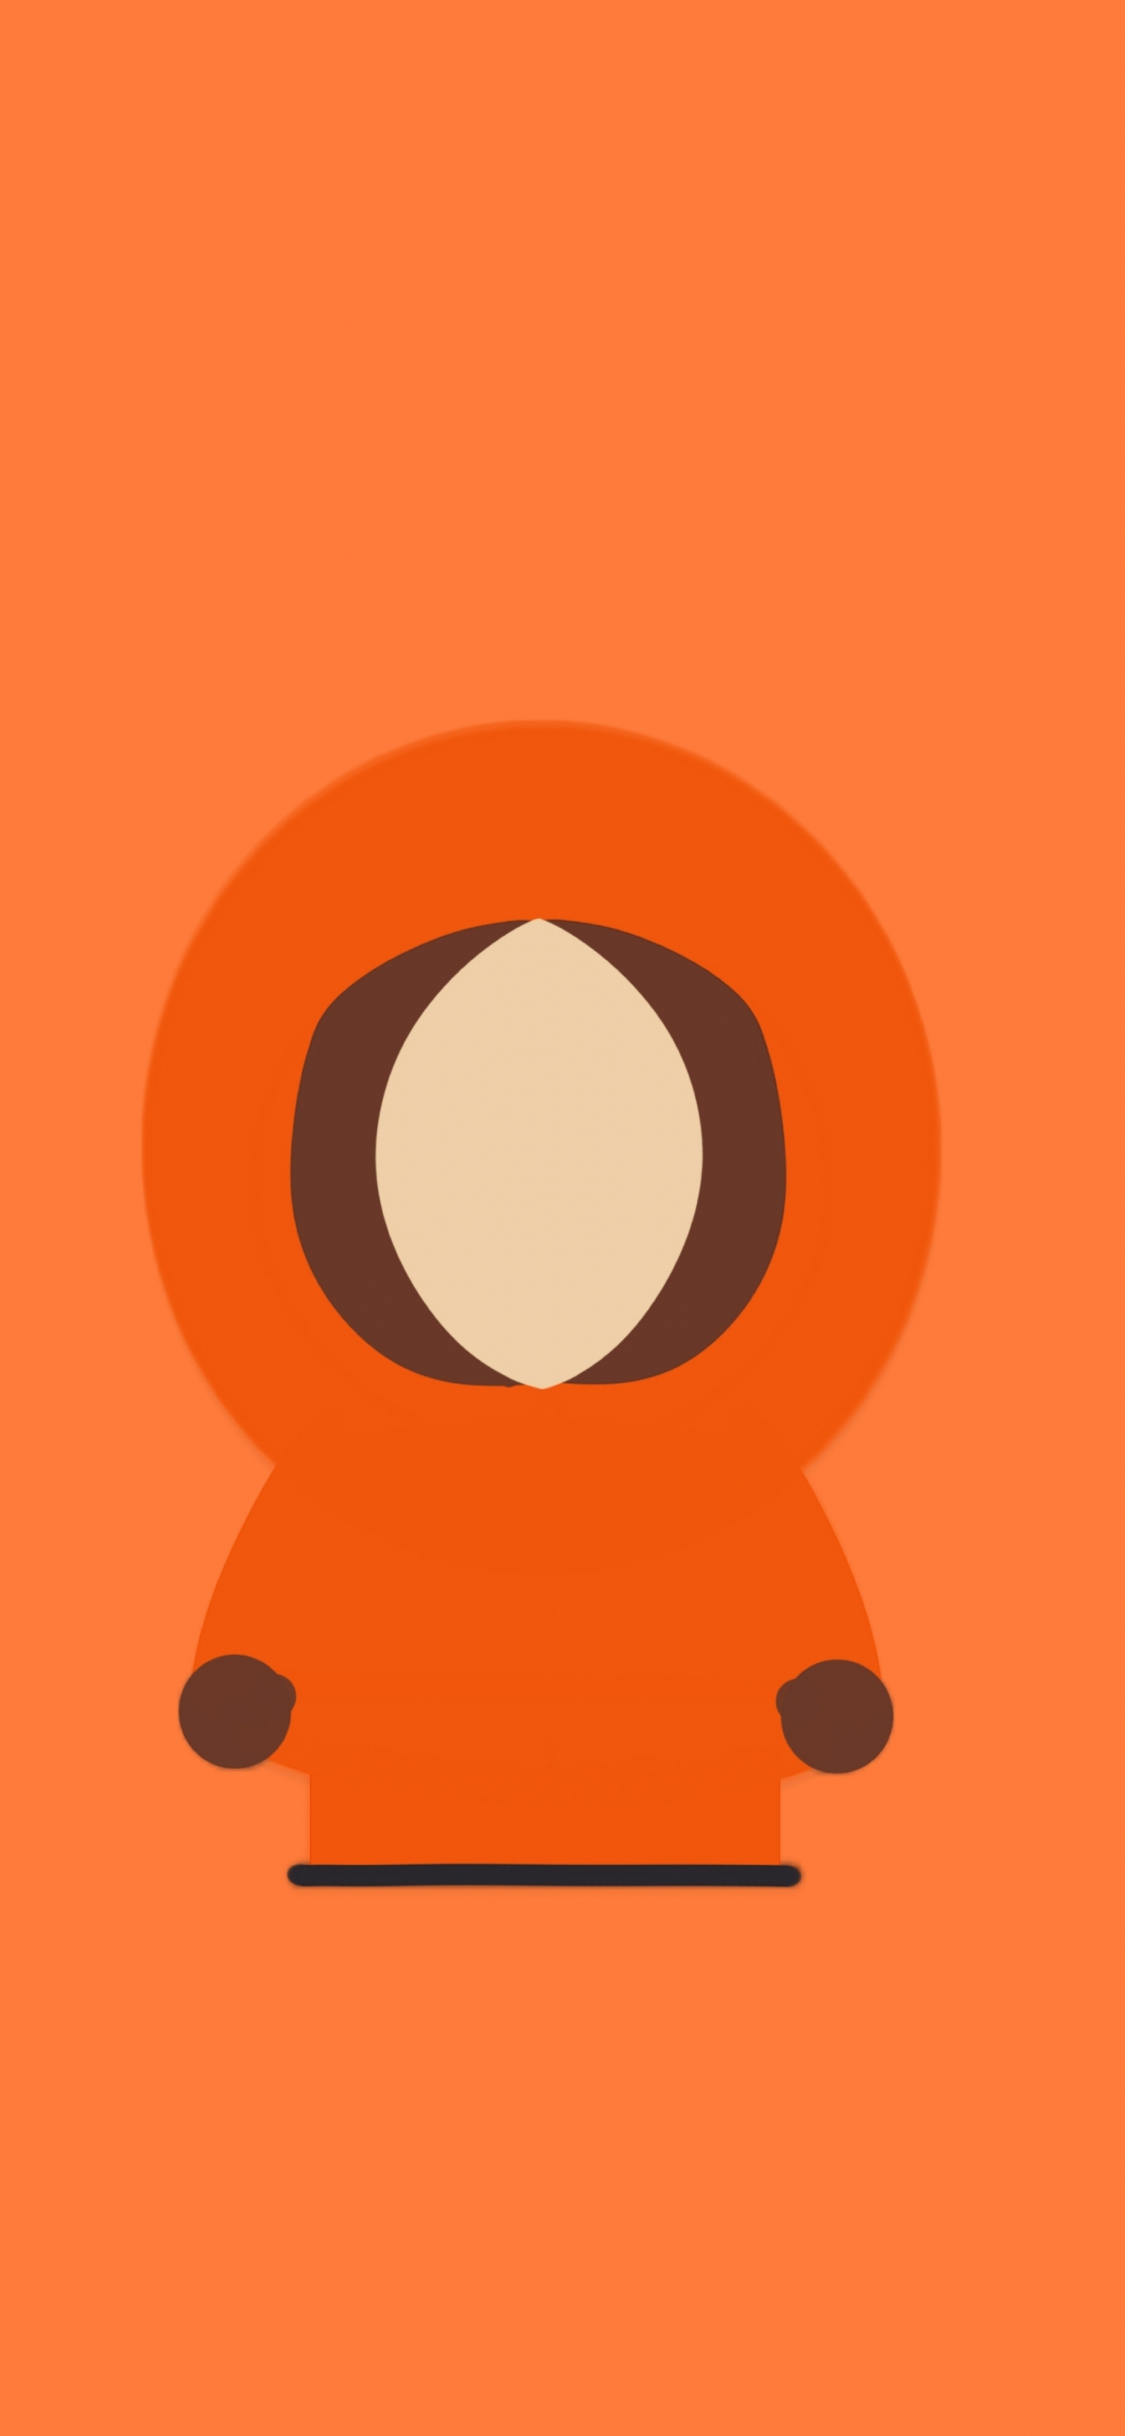 Download kenny mccormick, south park, minimal, tv show 1125x2436 wallpaper, iphone x, 1125x2436 HD image, background, 5370